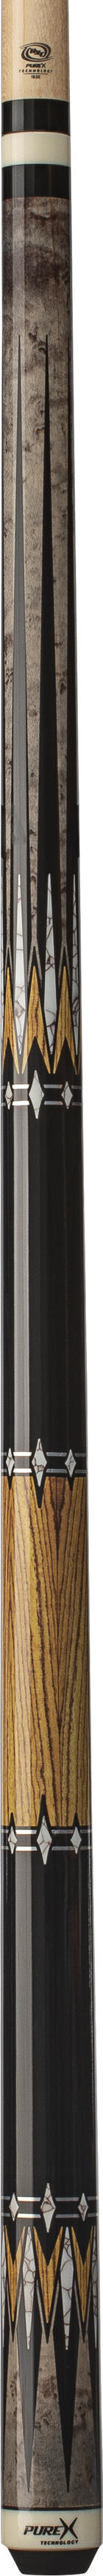 Pure X HXT-101 Pool Cue